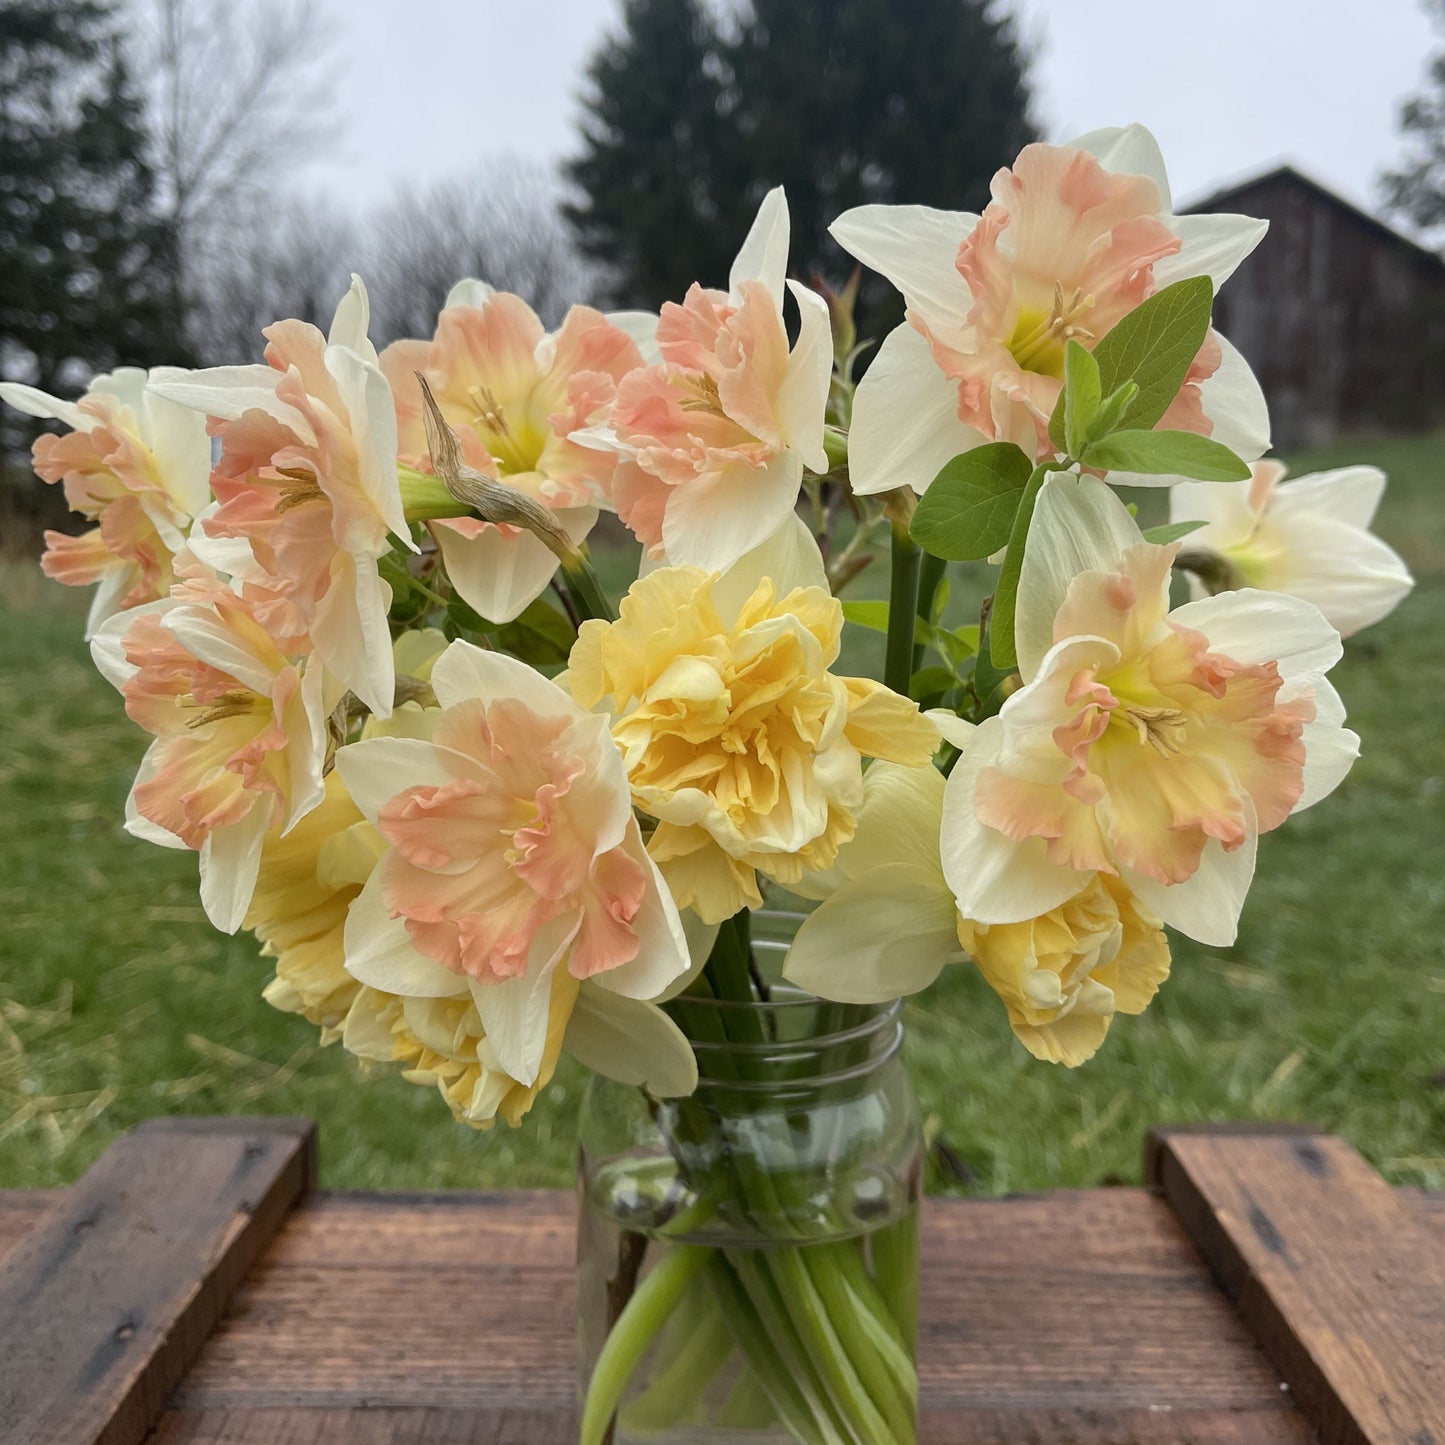 Cut-Your-Own Spring Flowers Subscription - Daffodils and Tulips